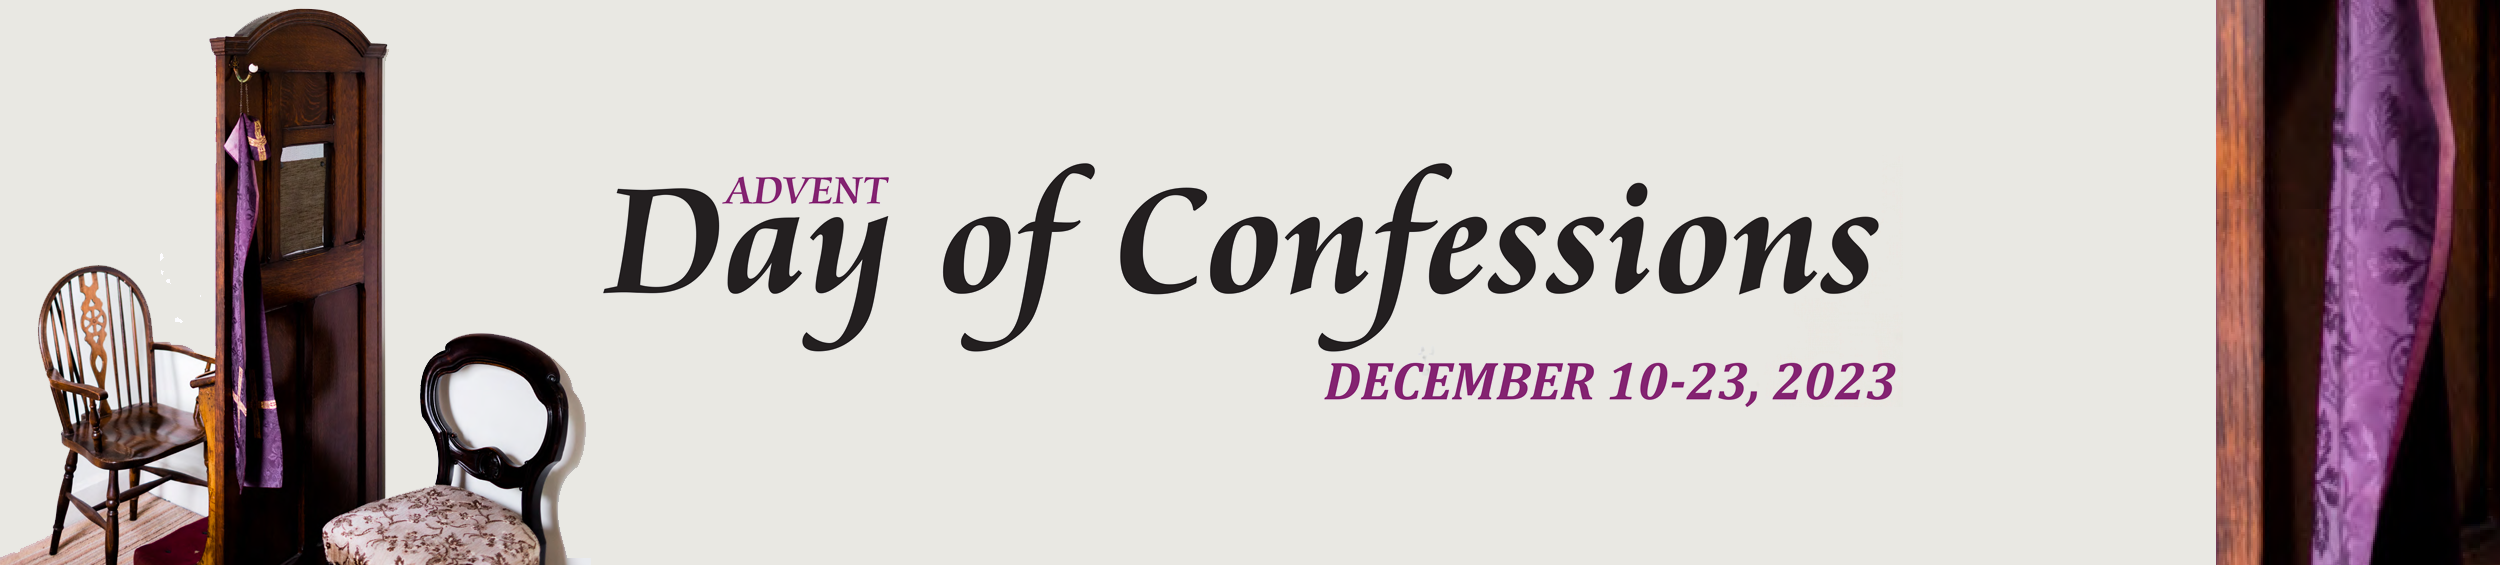 Day of Confessions for Advent 2023